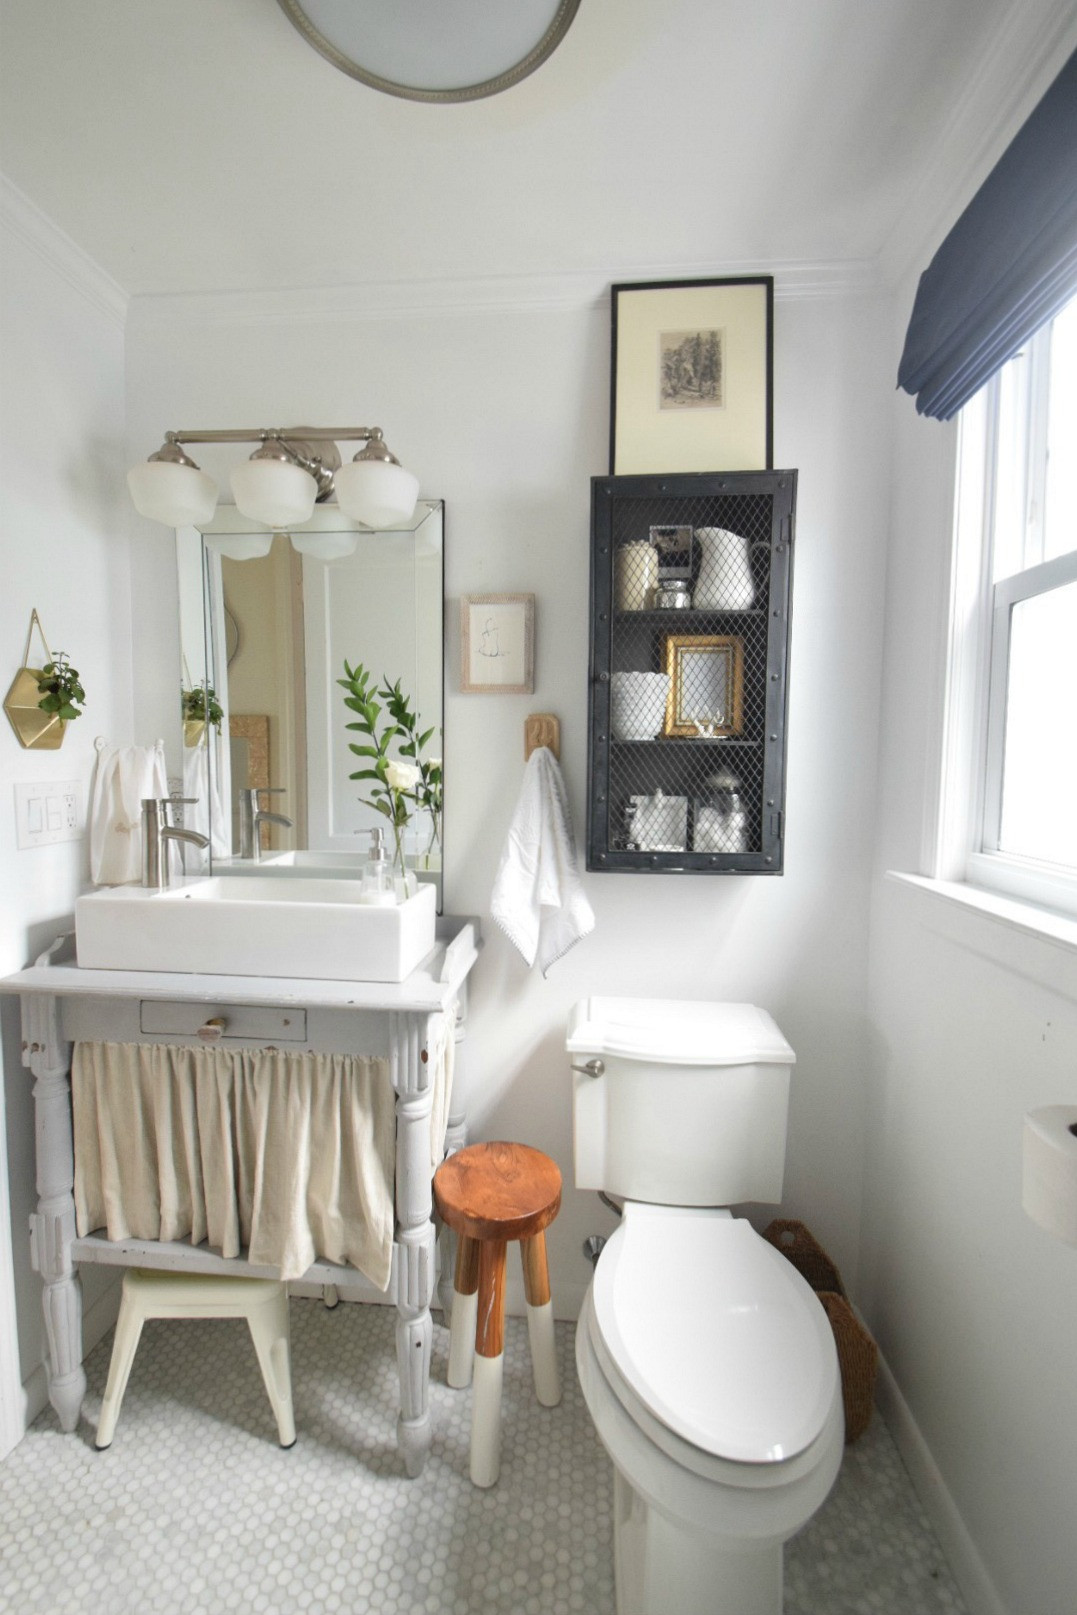 Pinterest Small Bathroom Ideas
 Small Bathroom Ideas and Solutions in our Tiny Cape